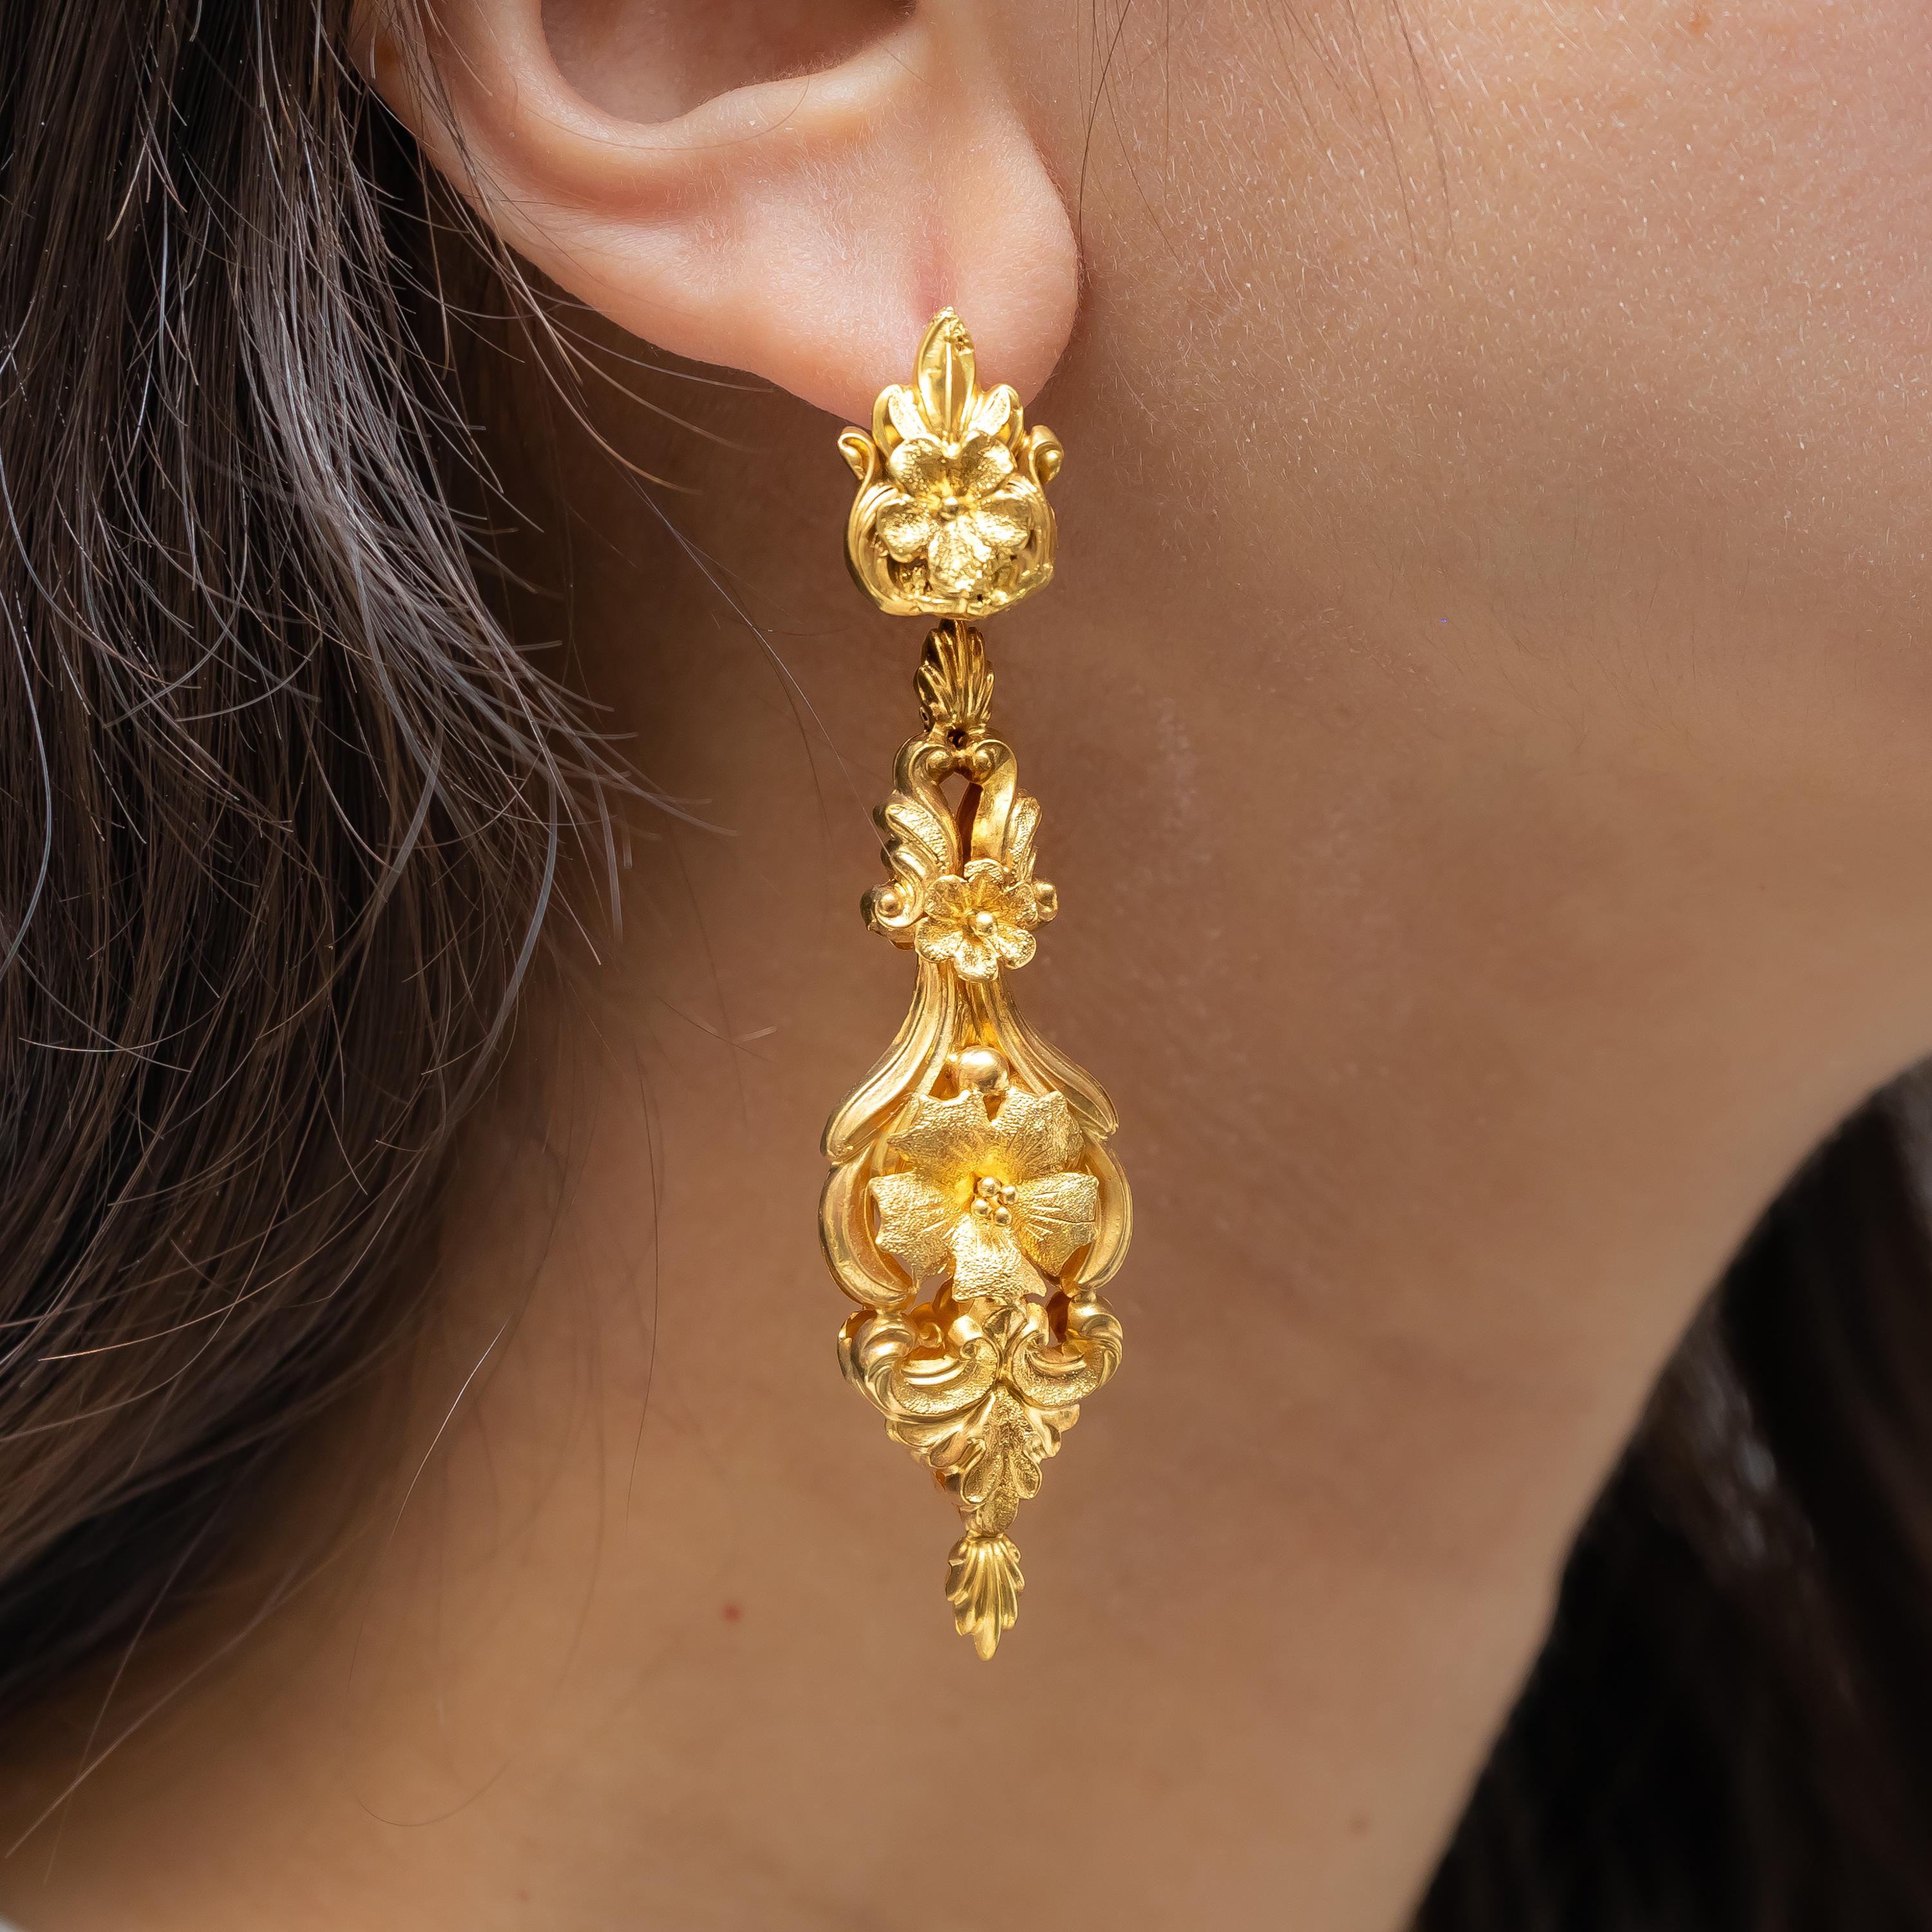 A Early Victorian gold drop earrings, the gold mounts with scrolled foliate designs, reversible drops, with two different designs, on front hook and eye fitting. 